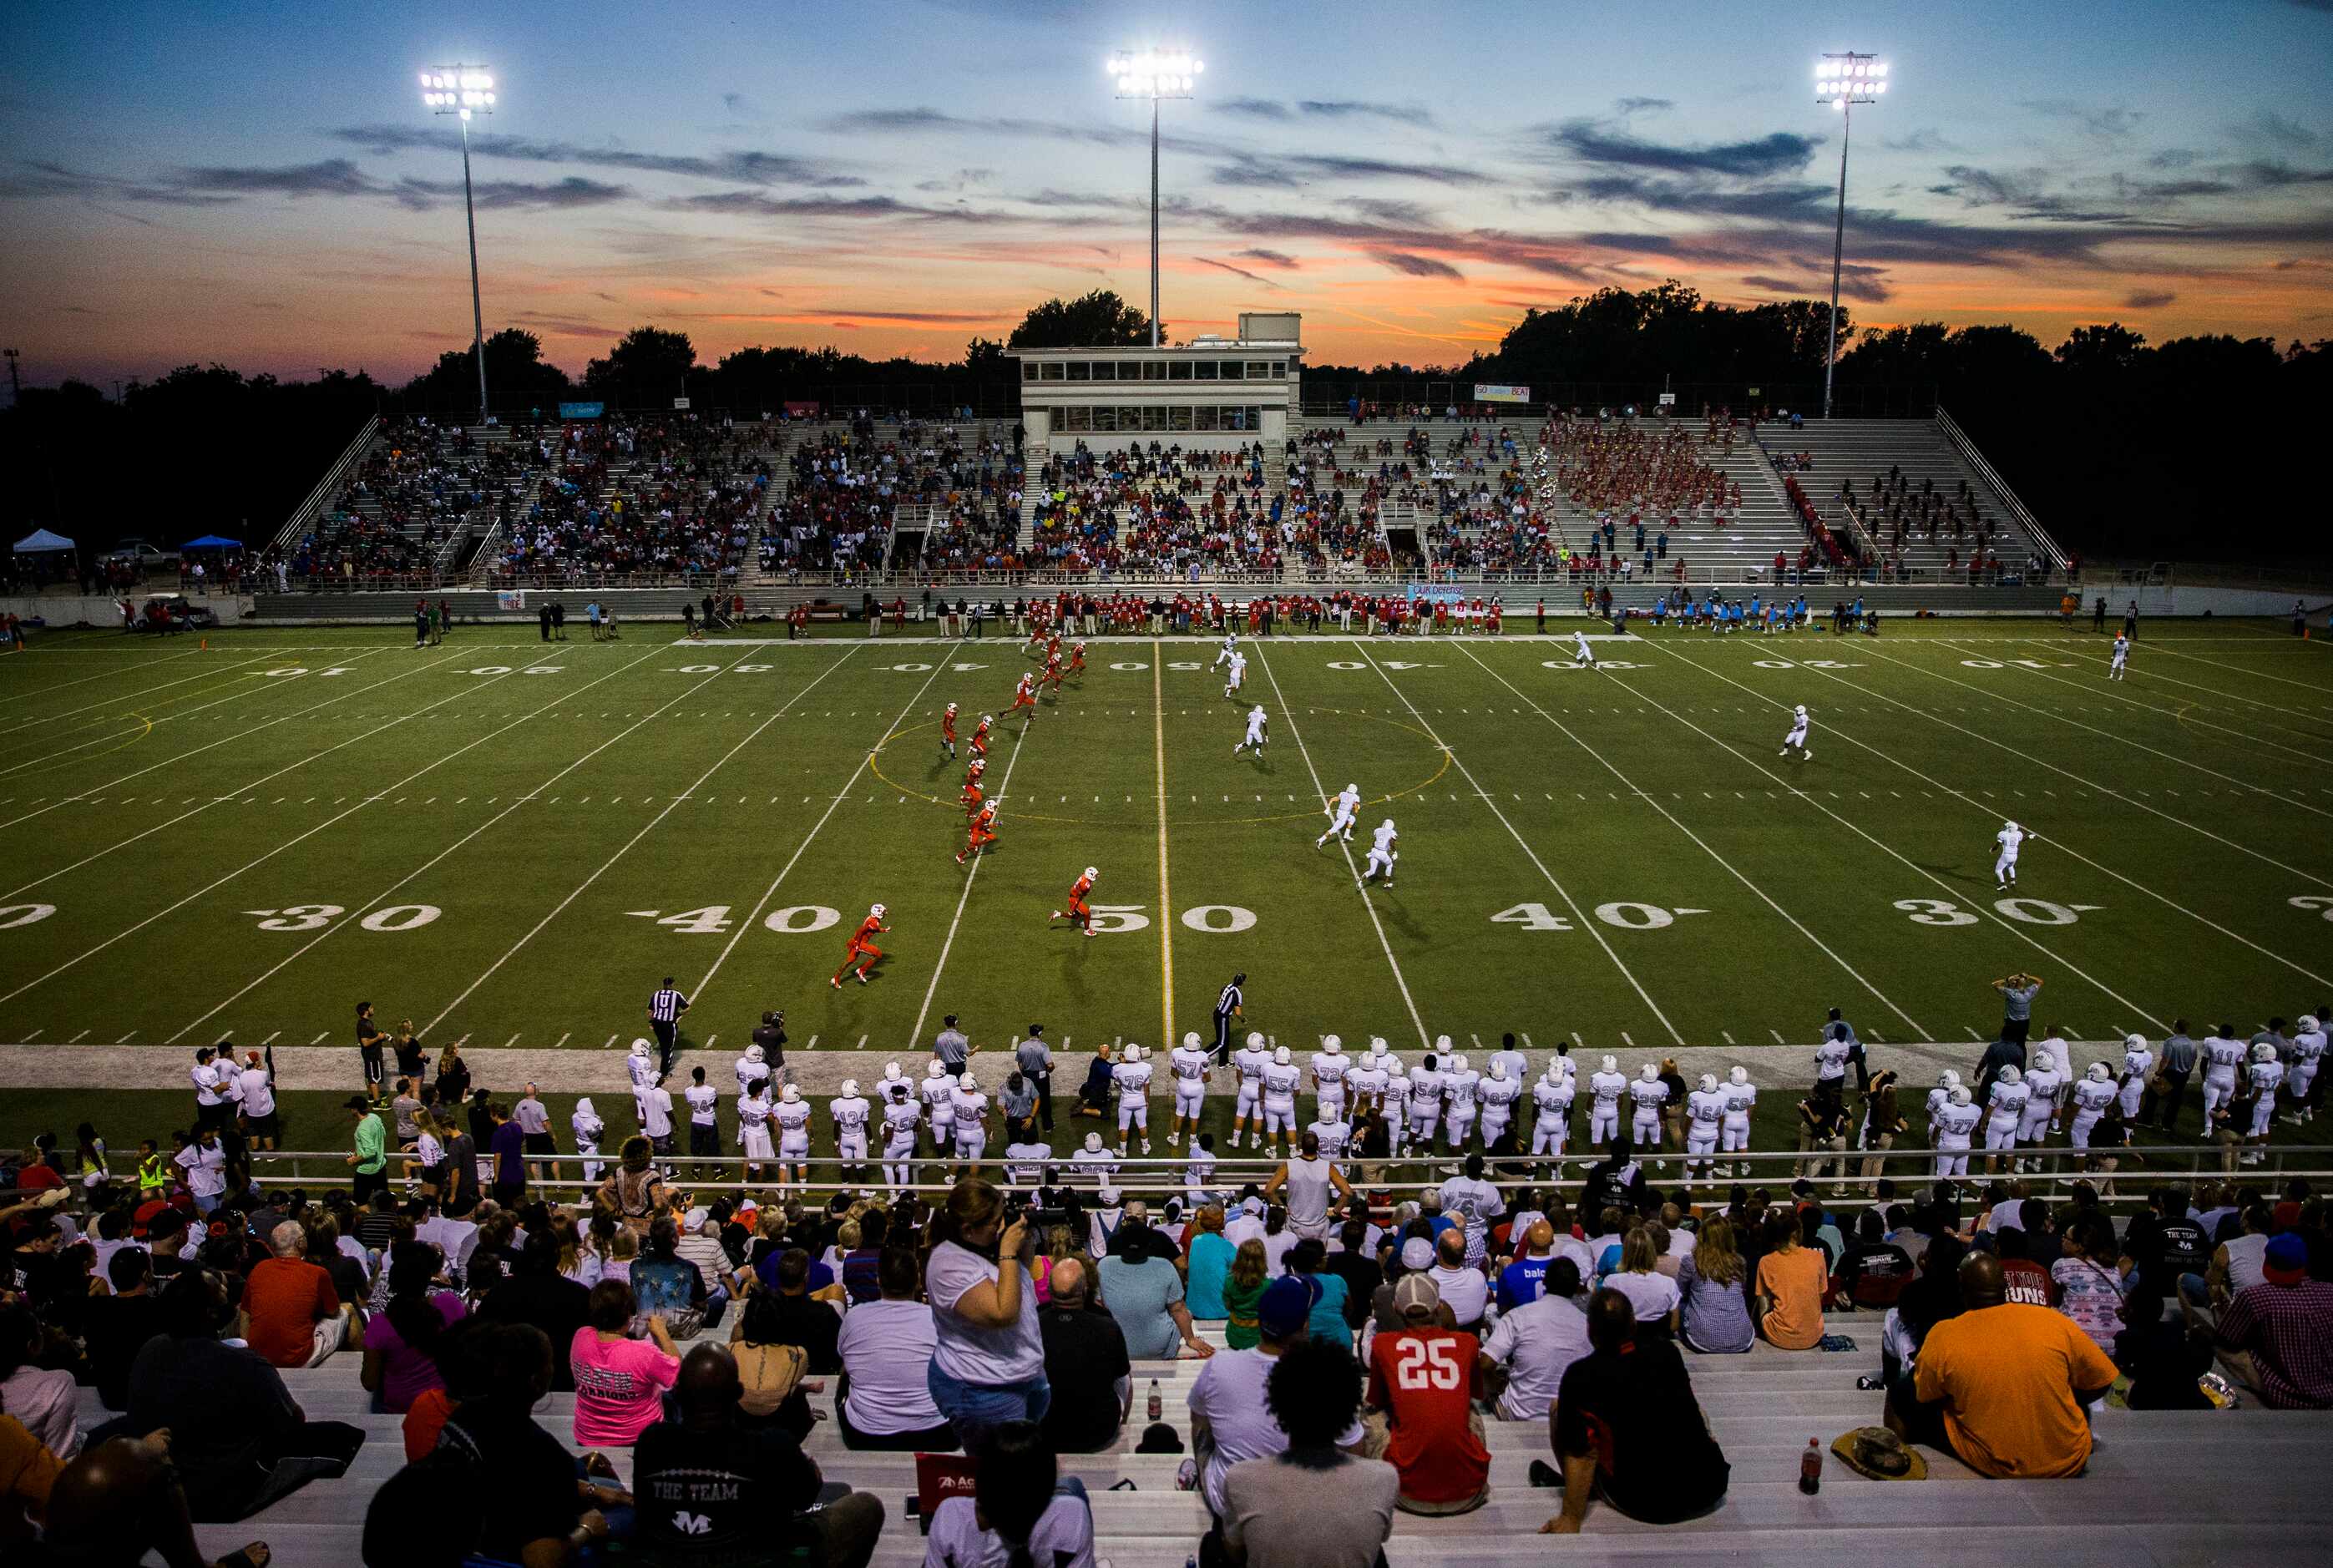 The sun sets over Forester Field during the first quarter of a high school football game...